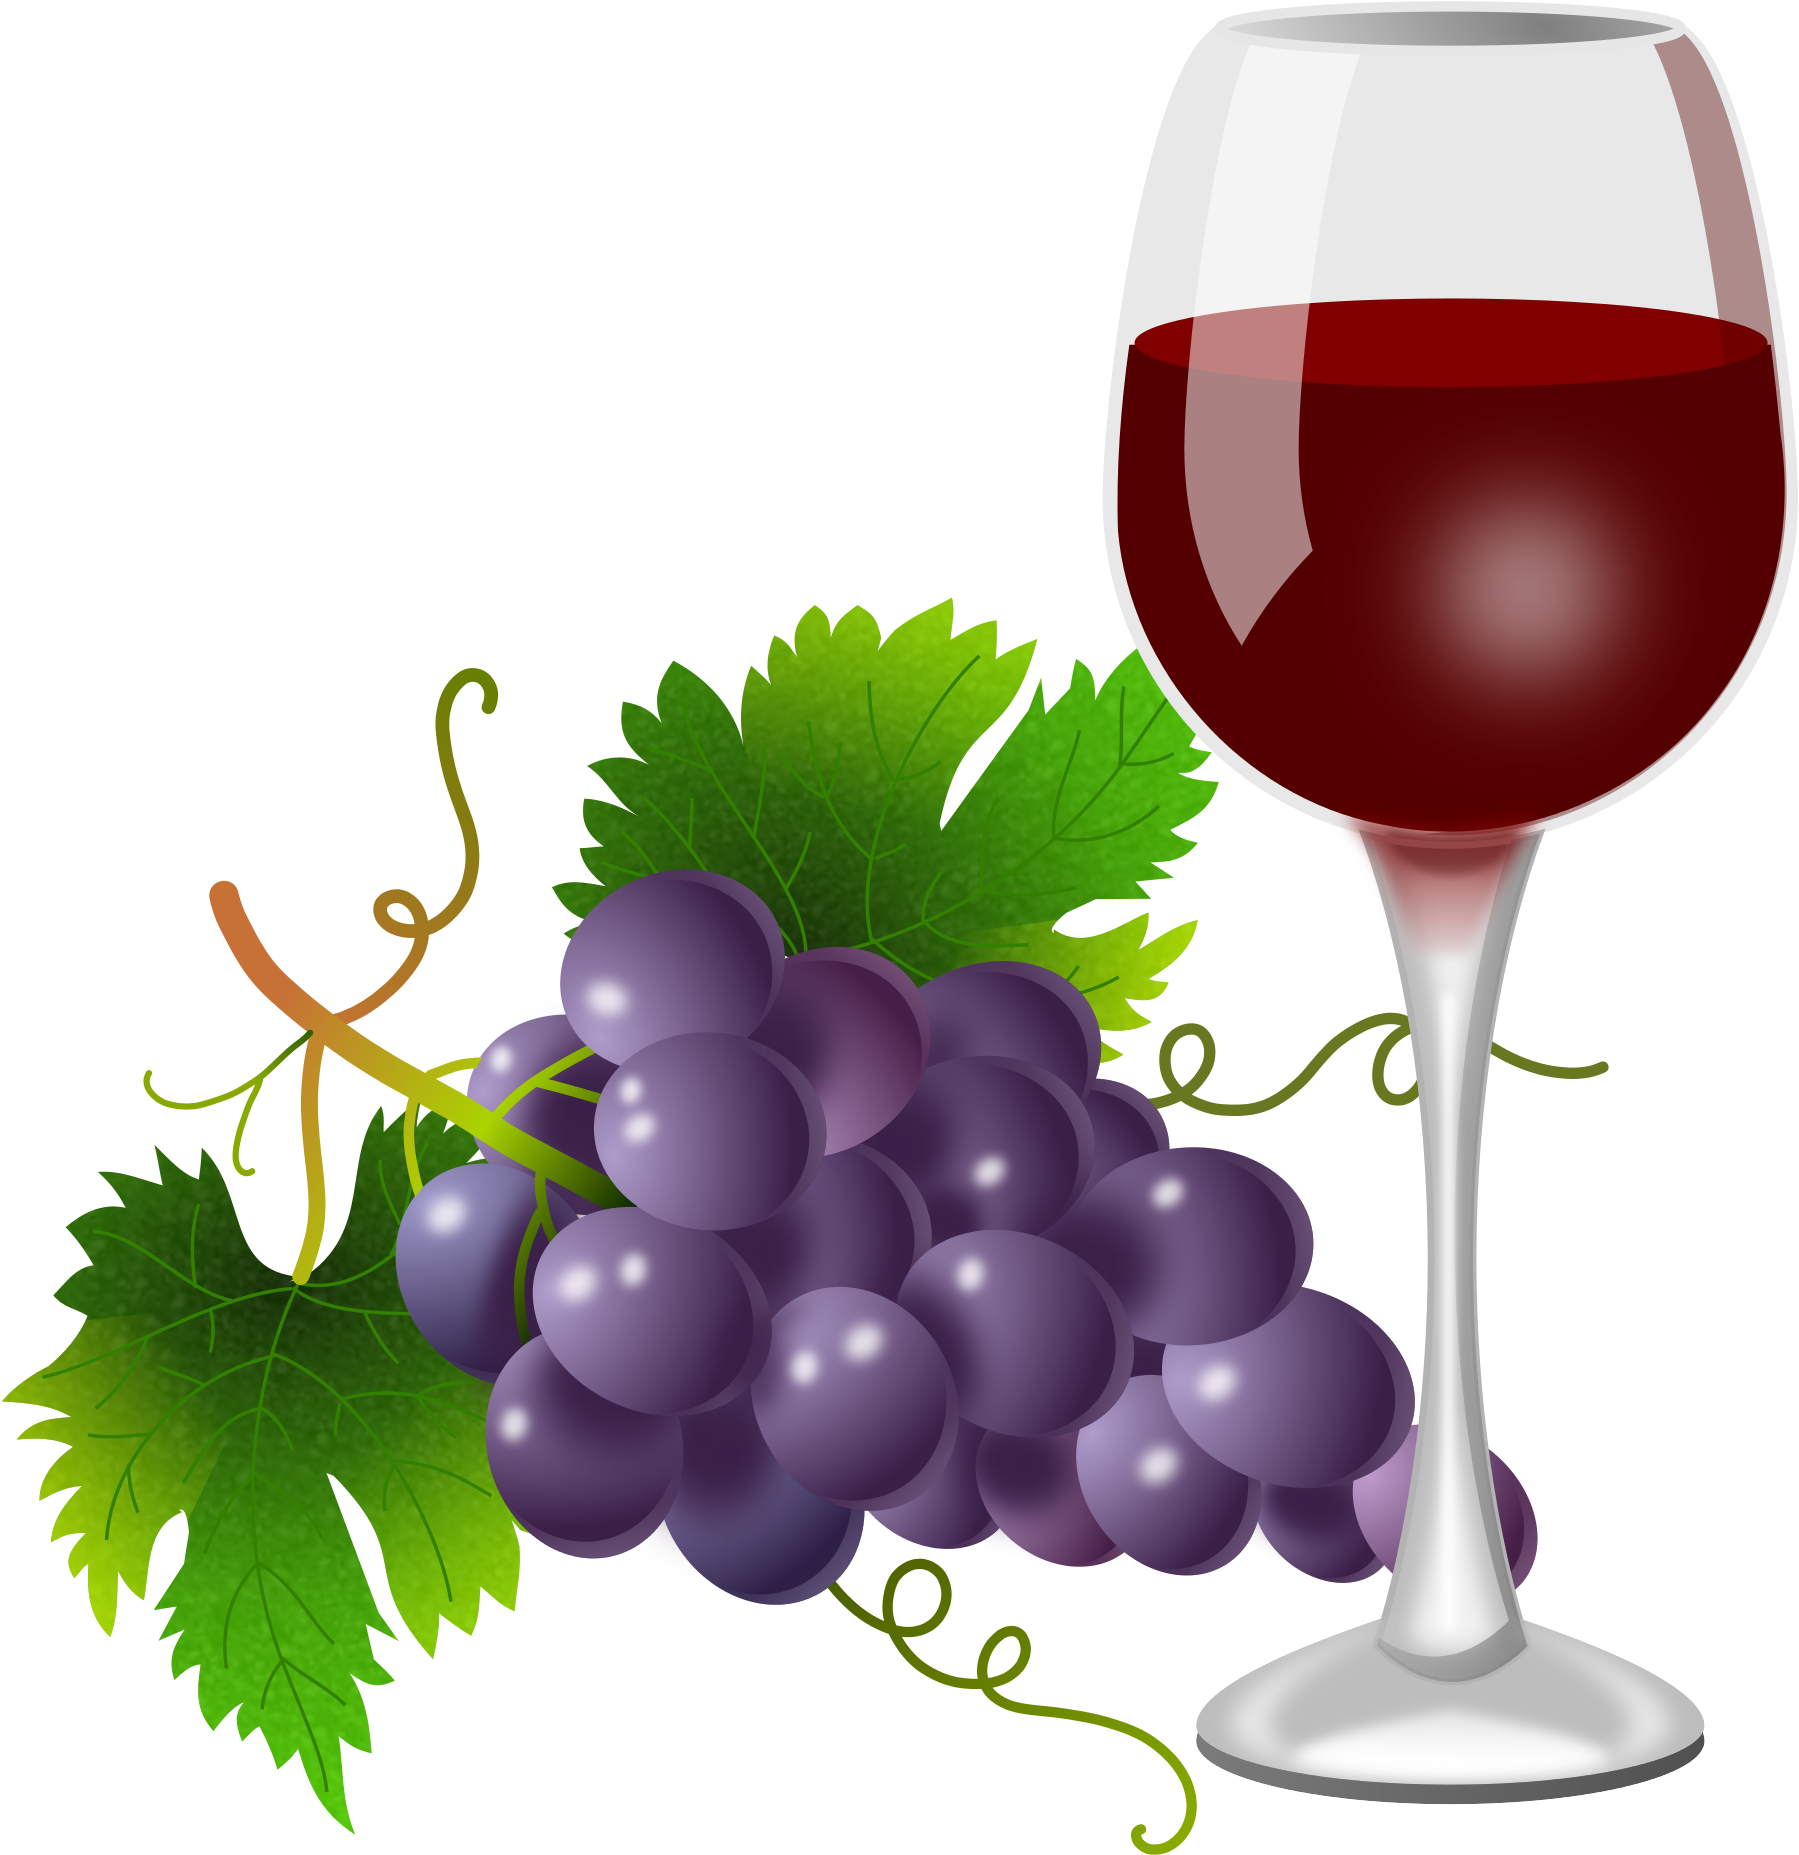 Purple Grapes And Wine Glass Clipart Everyday Foods - Wine Glass With Grapes Clip Art (2200x2276)